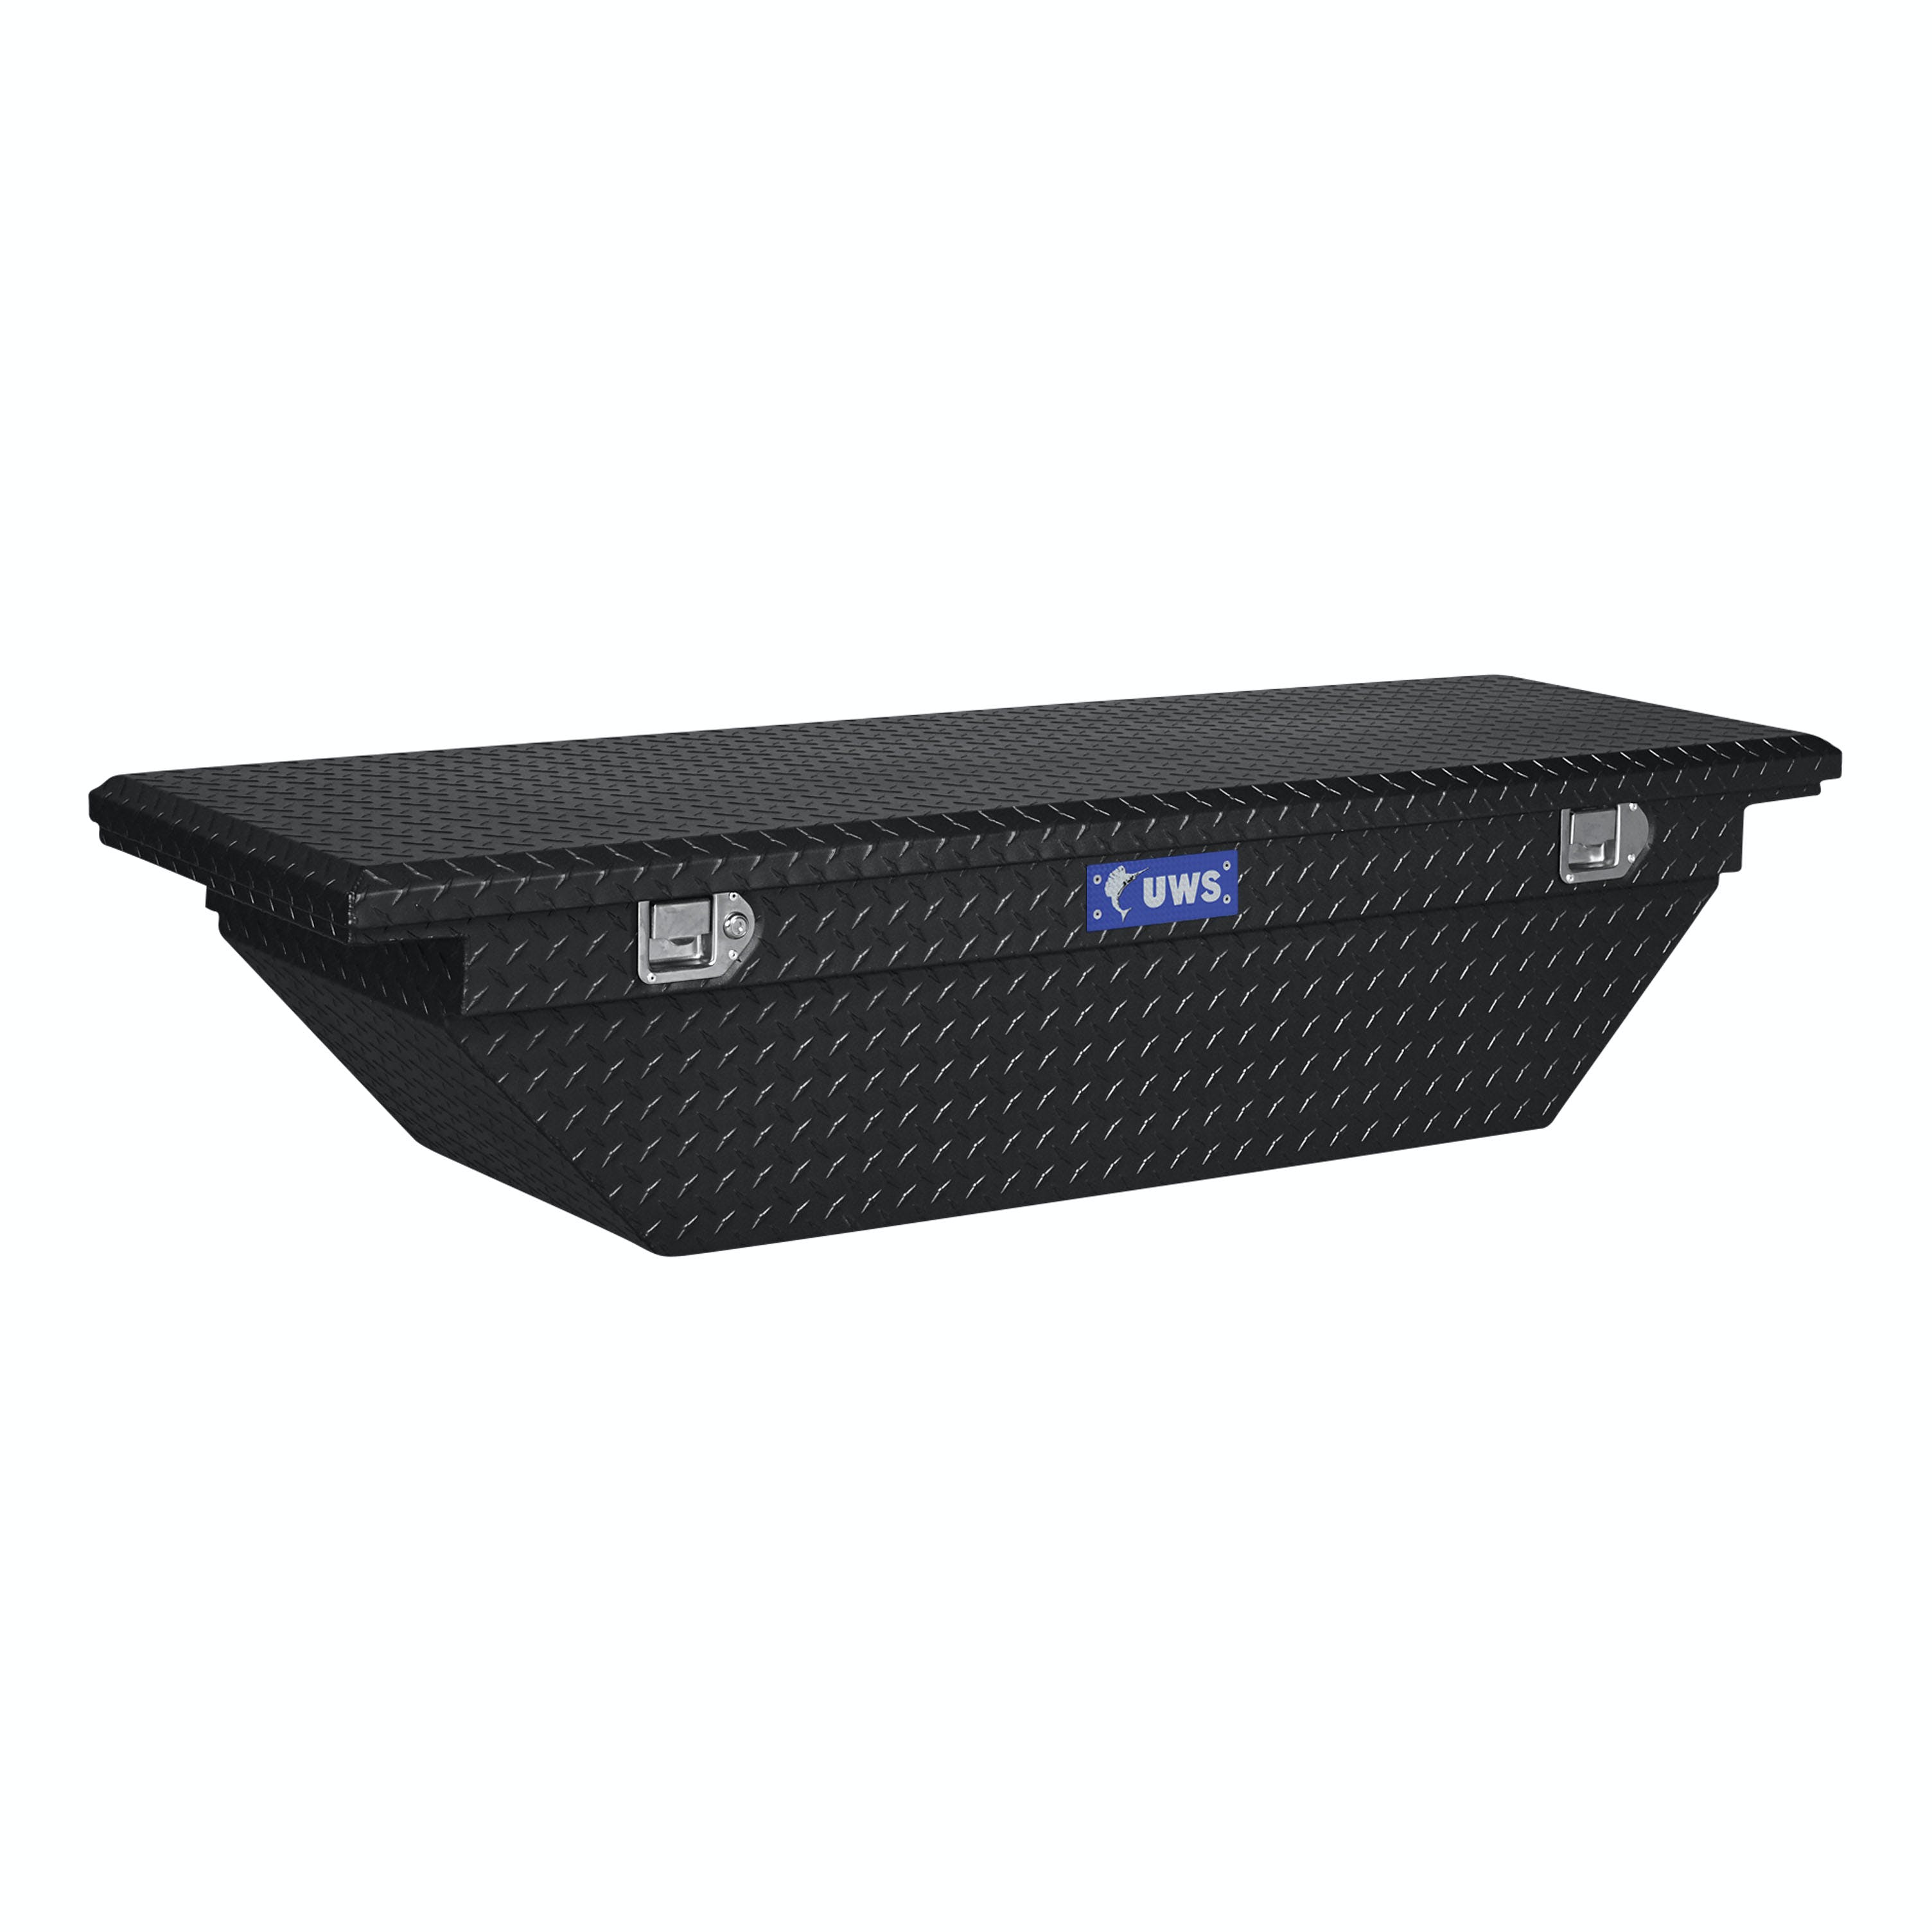 UWS TBS-60-A-LP-BLK 60 inch Aluminum Single Lid Crossover Toolbox Low Profile Angled Black